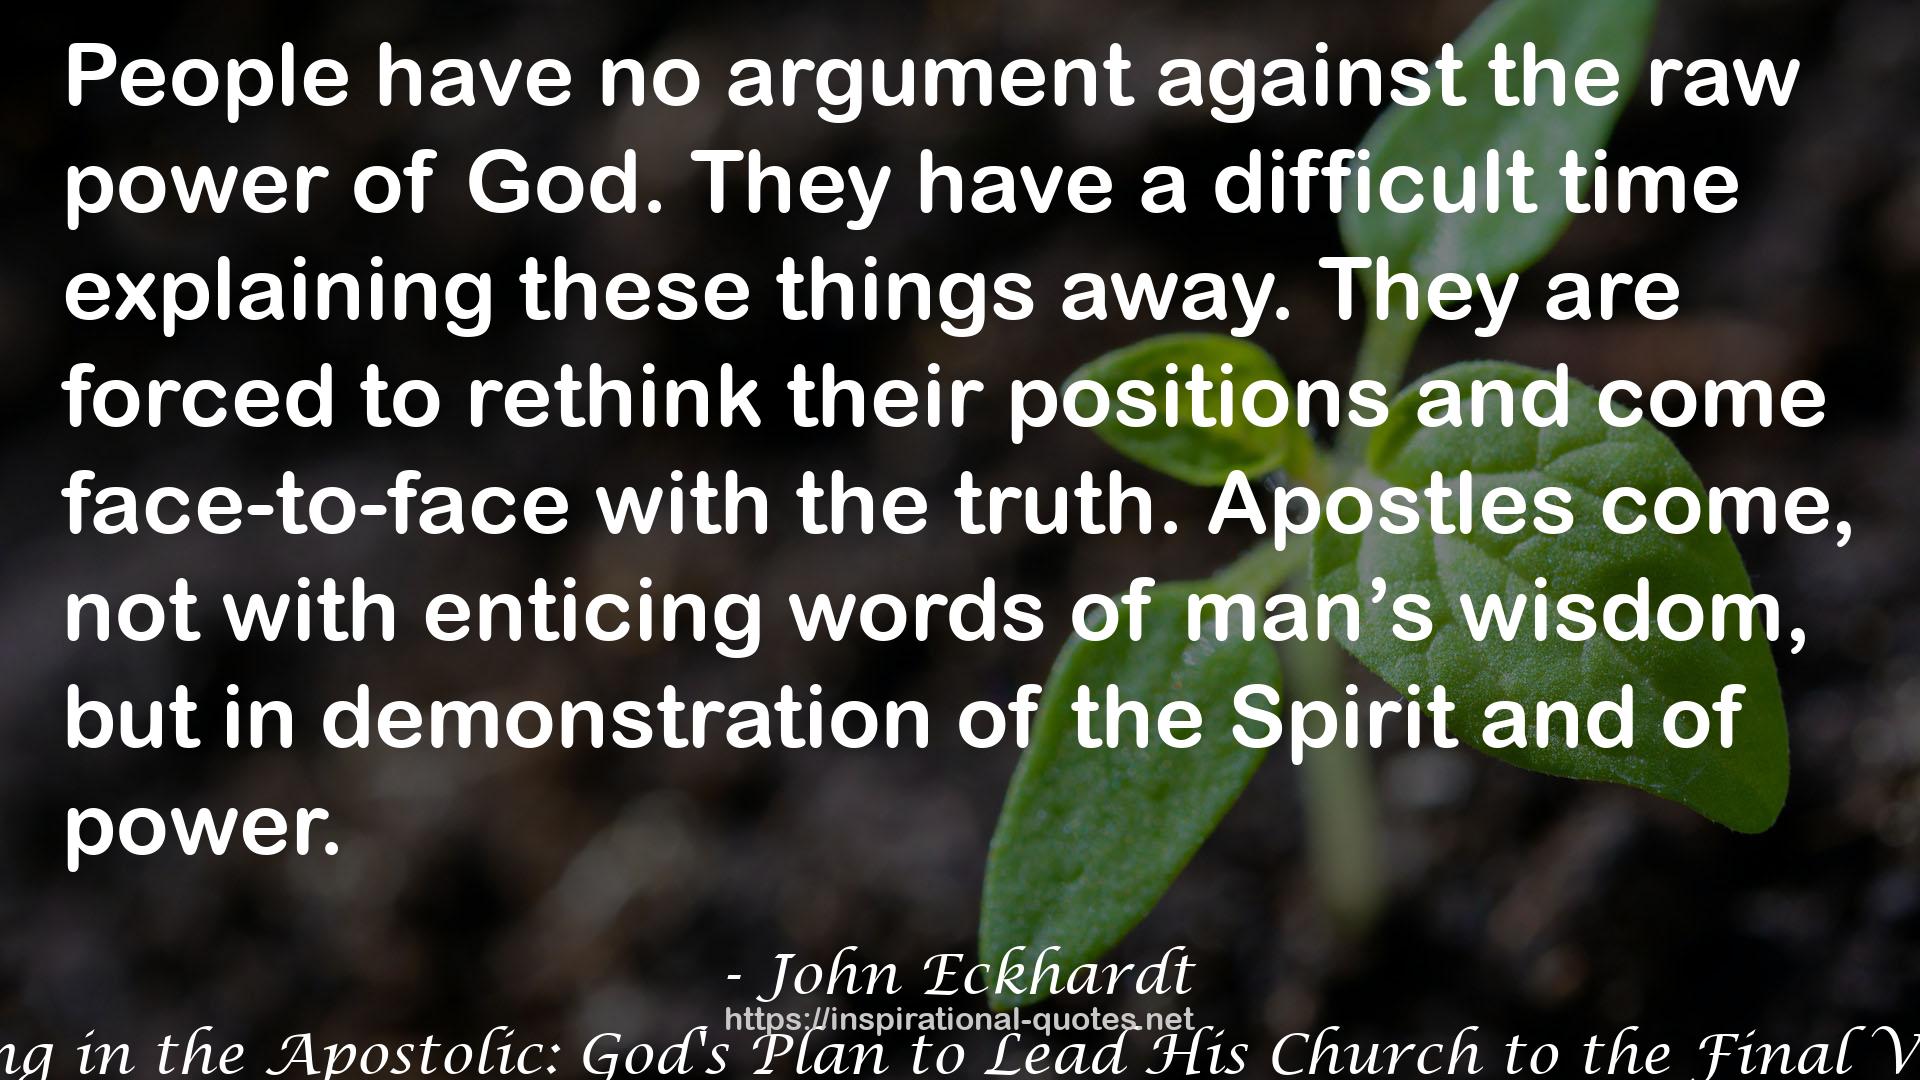 Moving in the Apostolic: God's Plan to Lead His Church to the Final Victory QUOTES